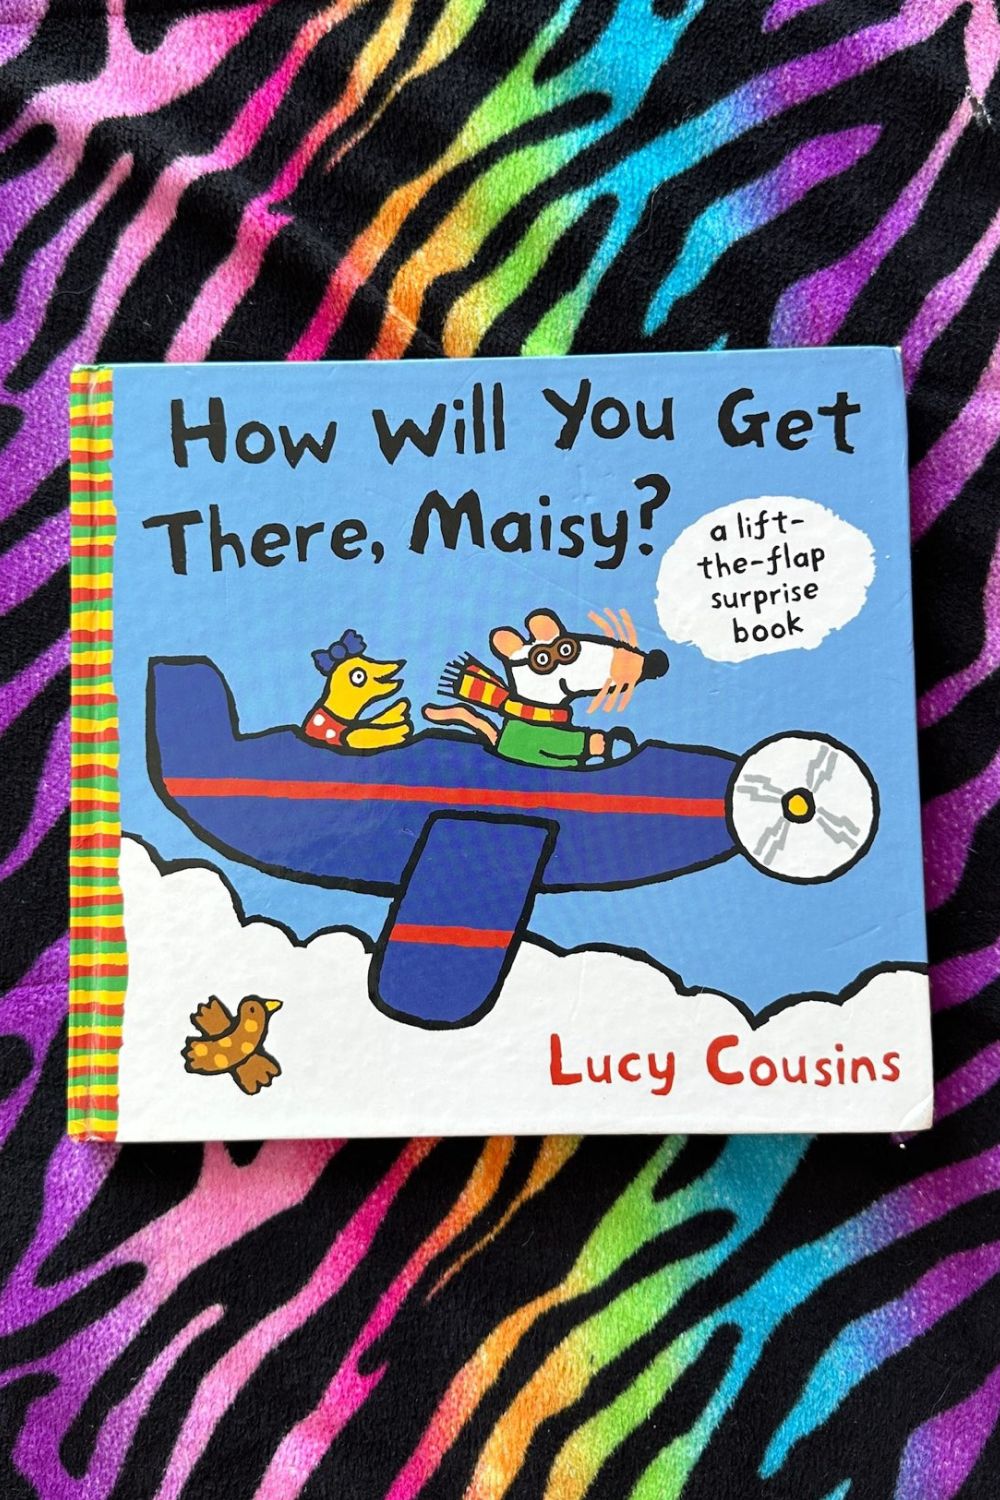 HOW WILL YOU GET THERE, MAISY? BOOK*